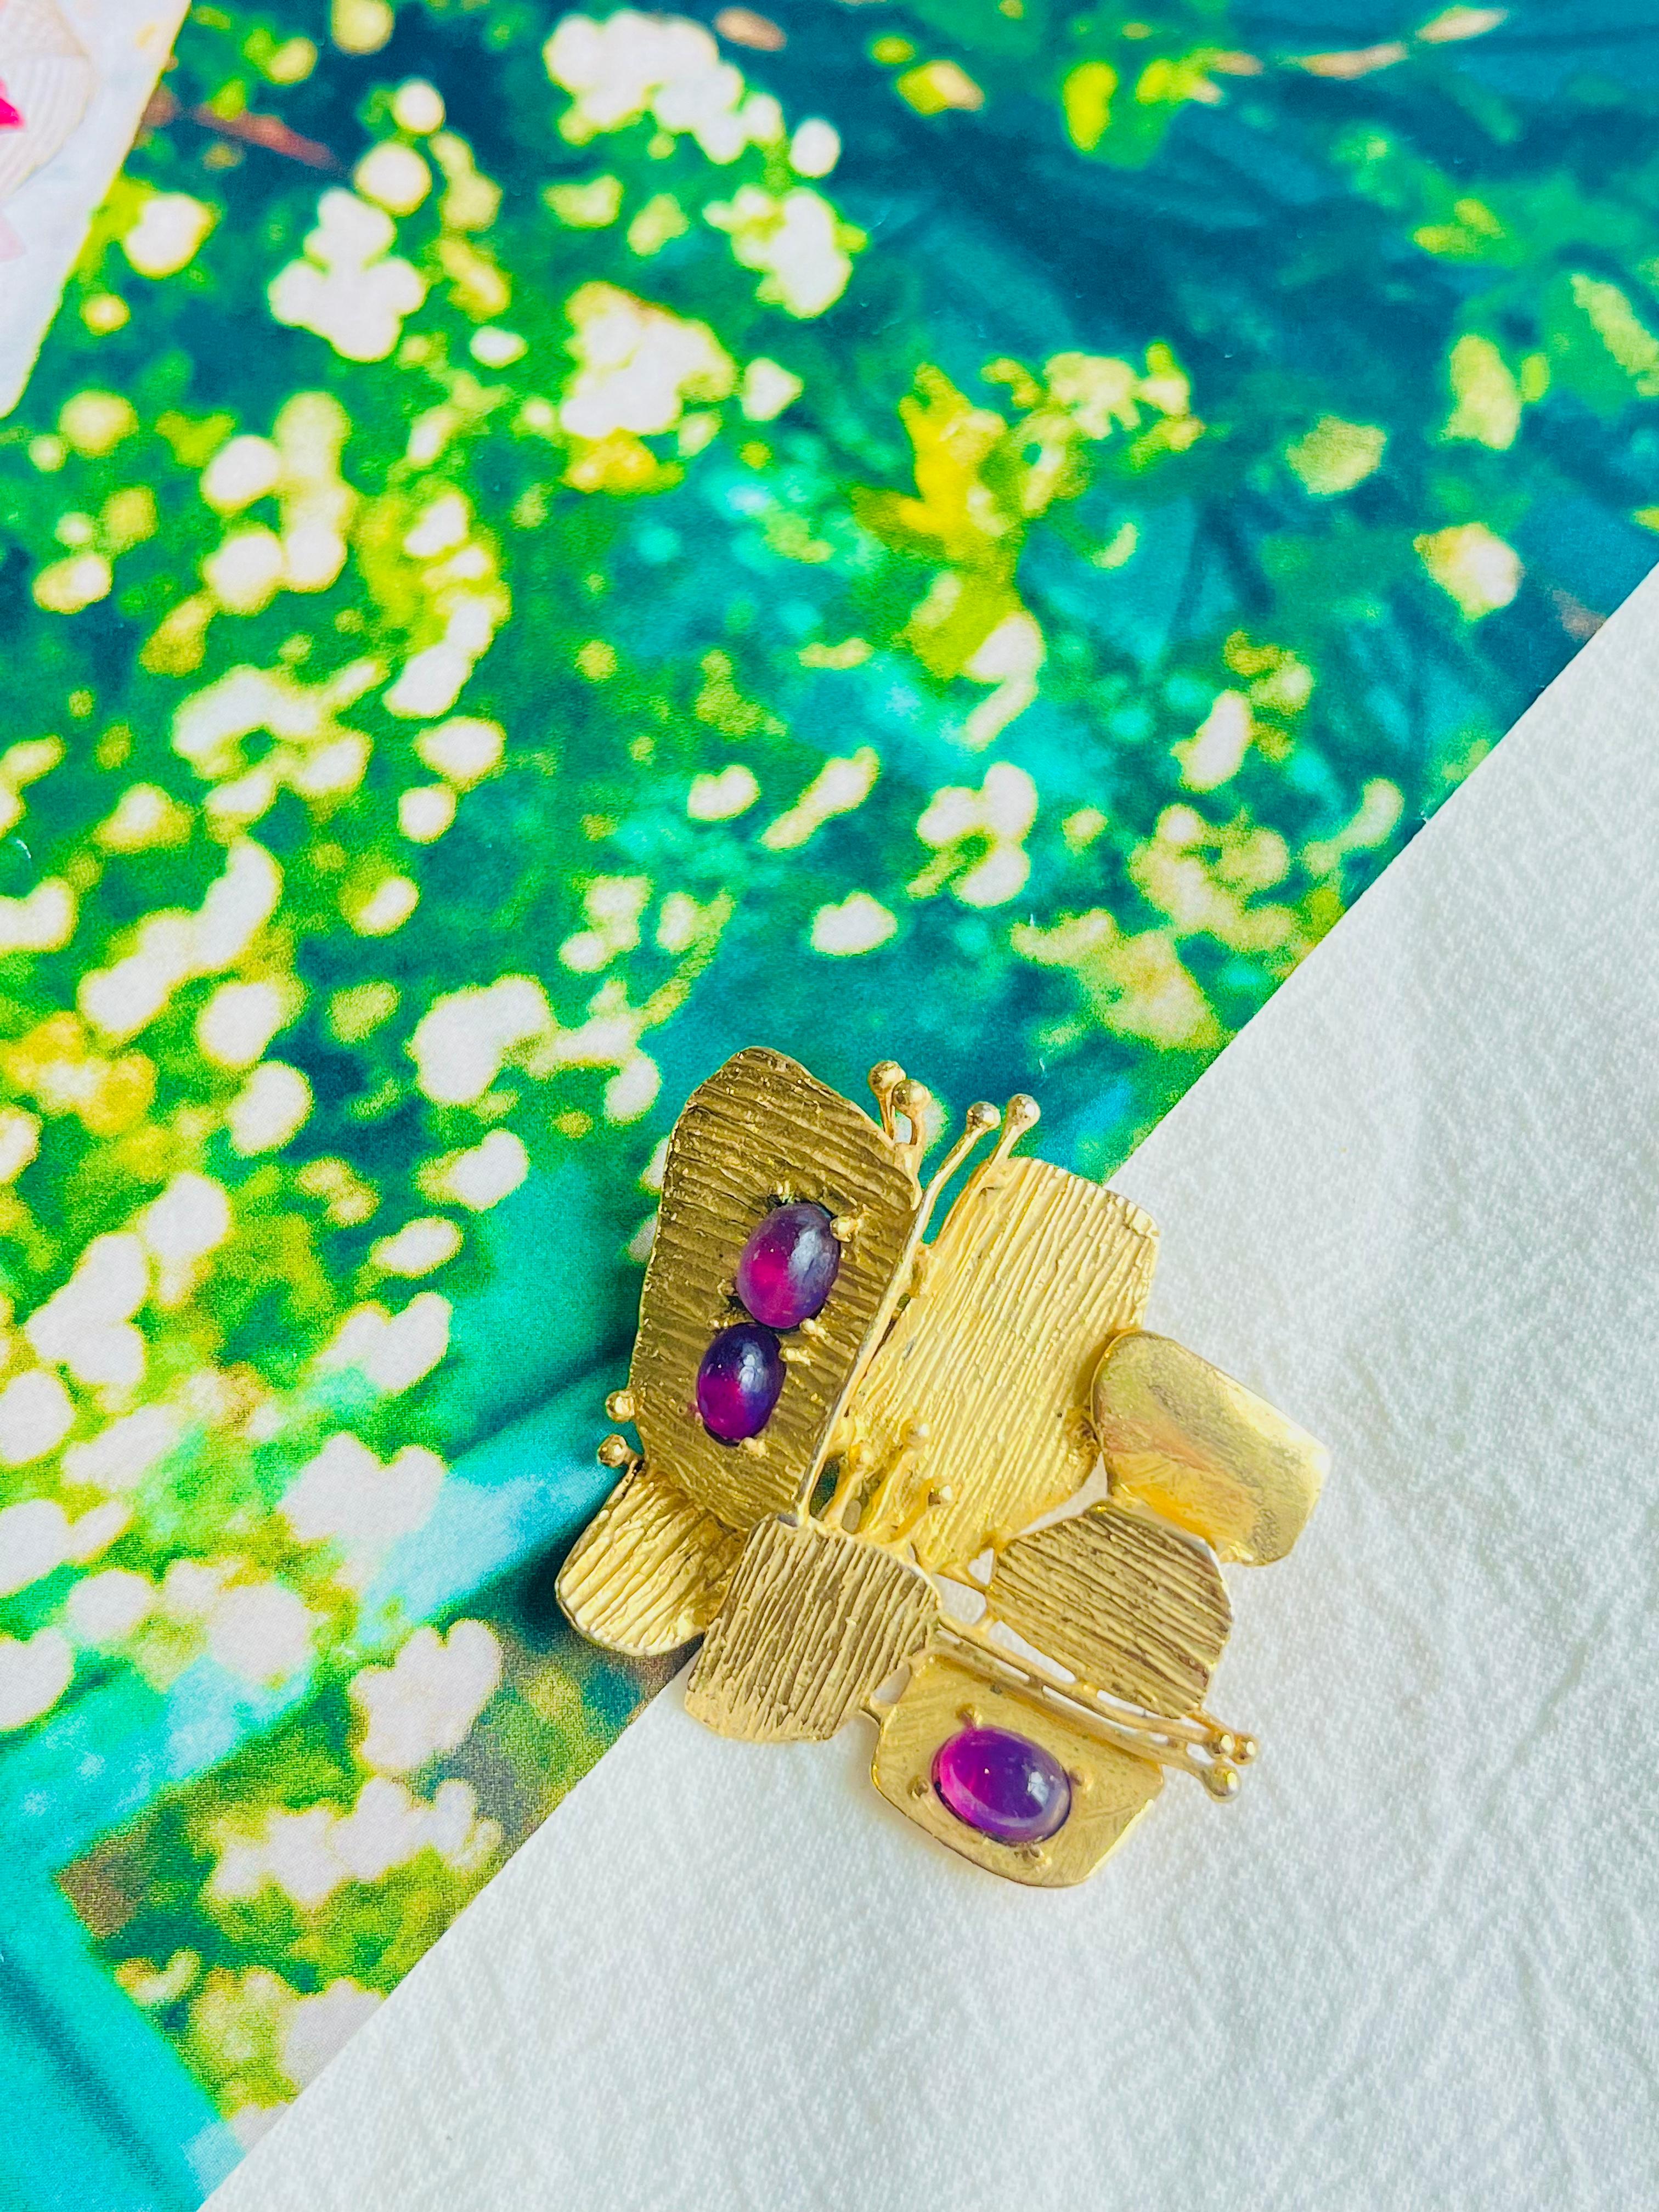 Christian Dior GROSSE 1970 Vintage Amethyst Butterfly Patchwork Modernist Brooch In Good Condition For Sale In Wokingham, England